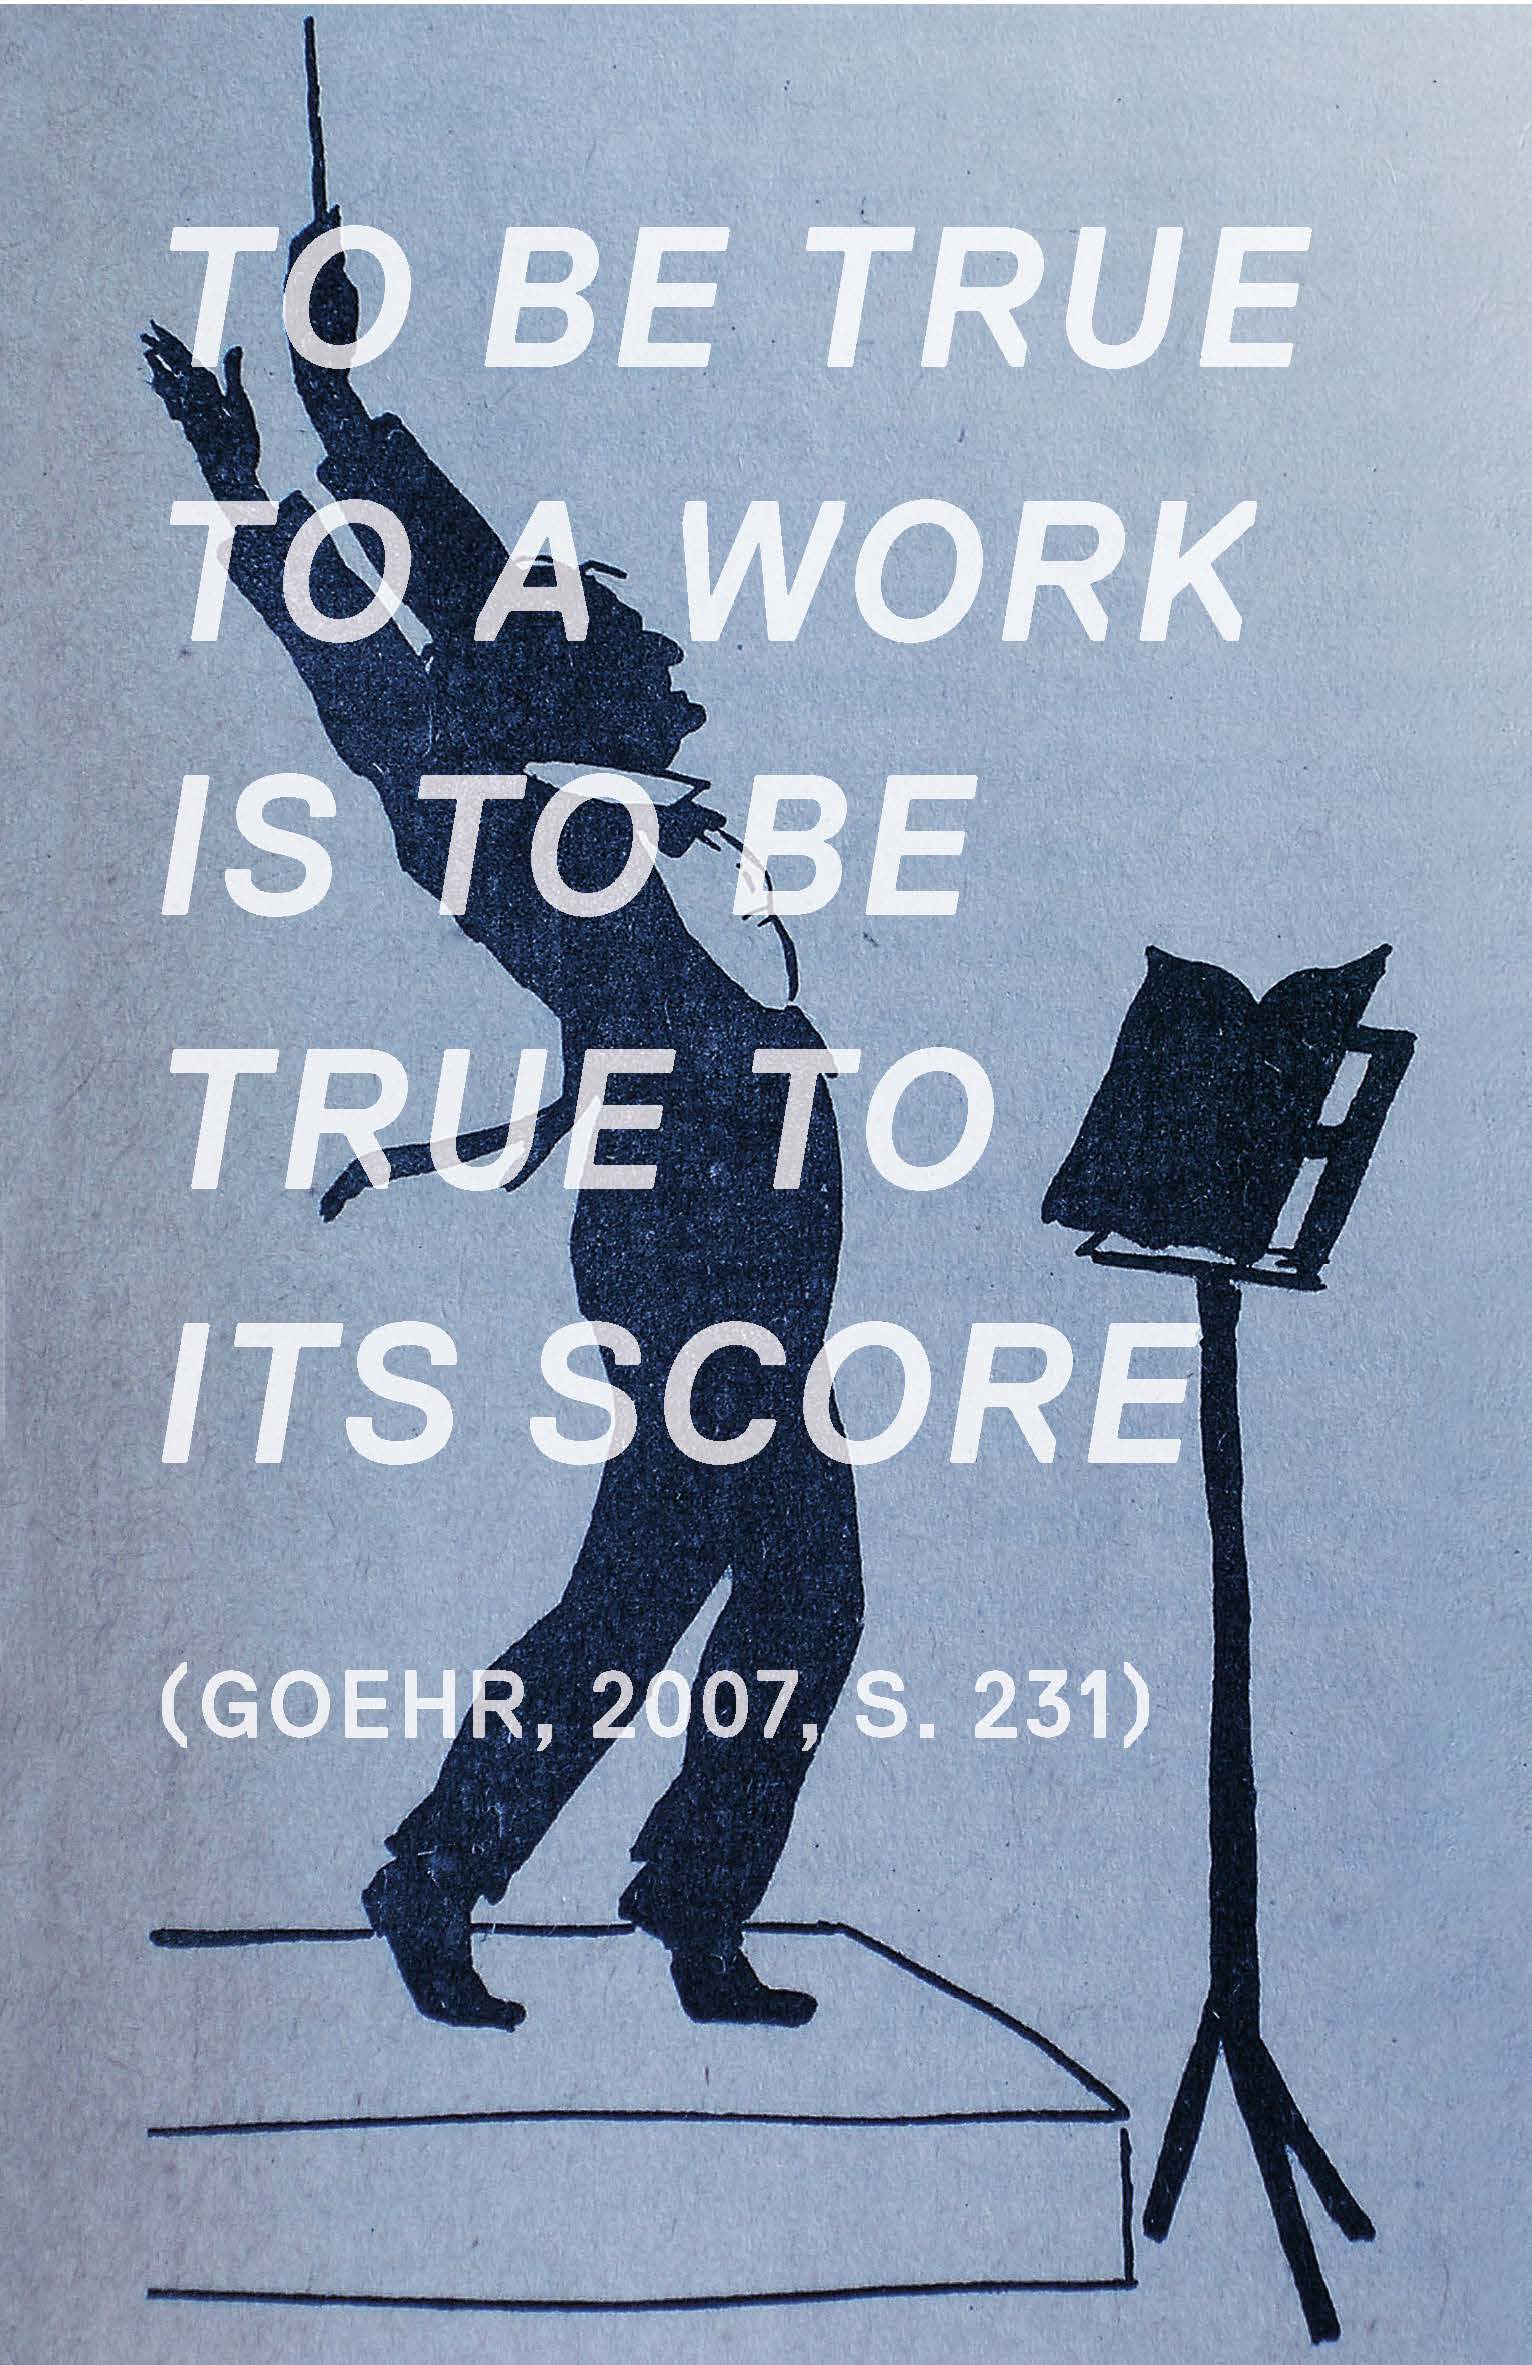 To be true to a work is to be true to its score